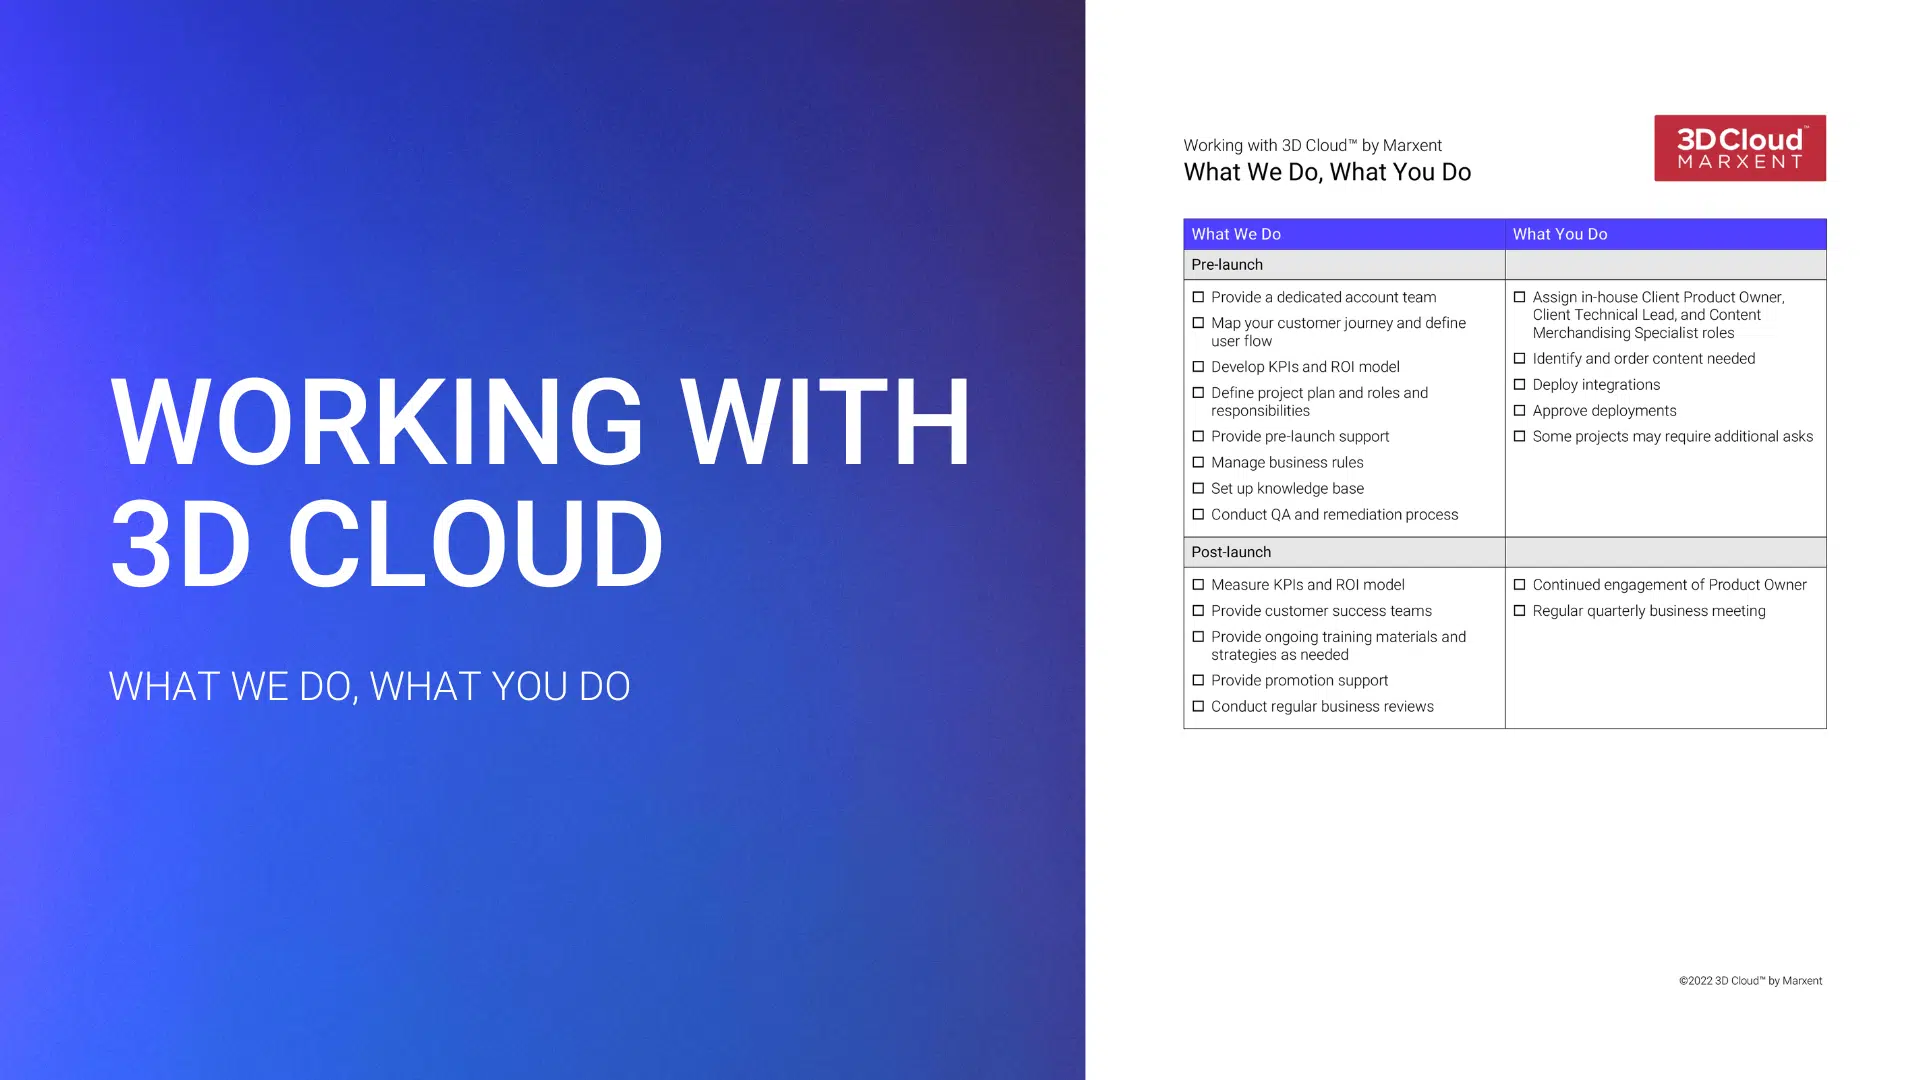 Working with 3D Cloud – What We Do, What You Do